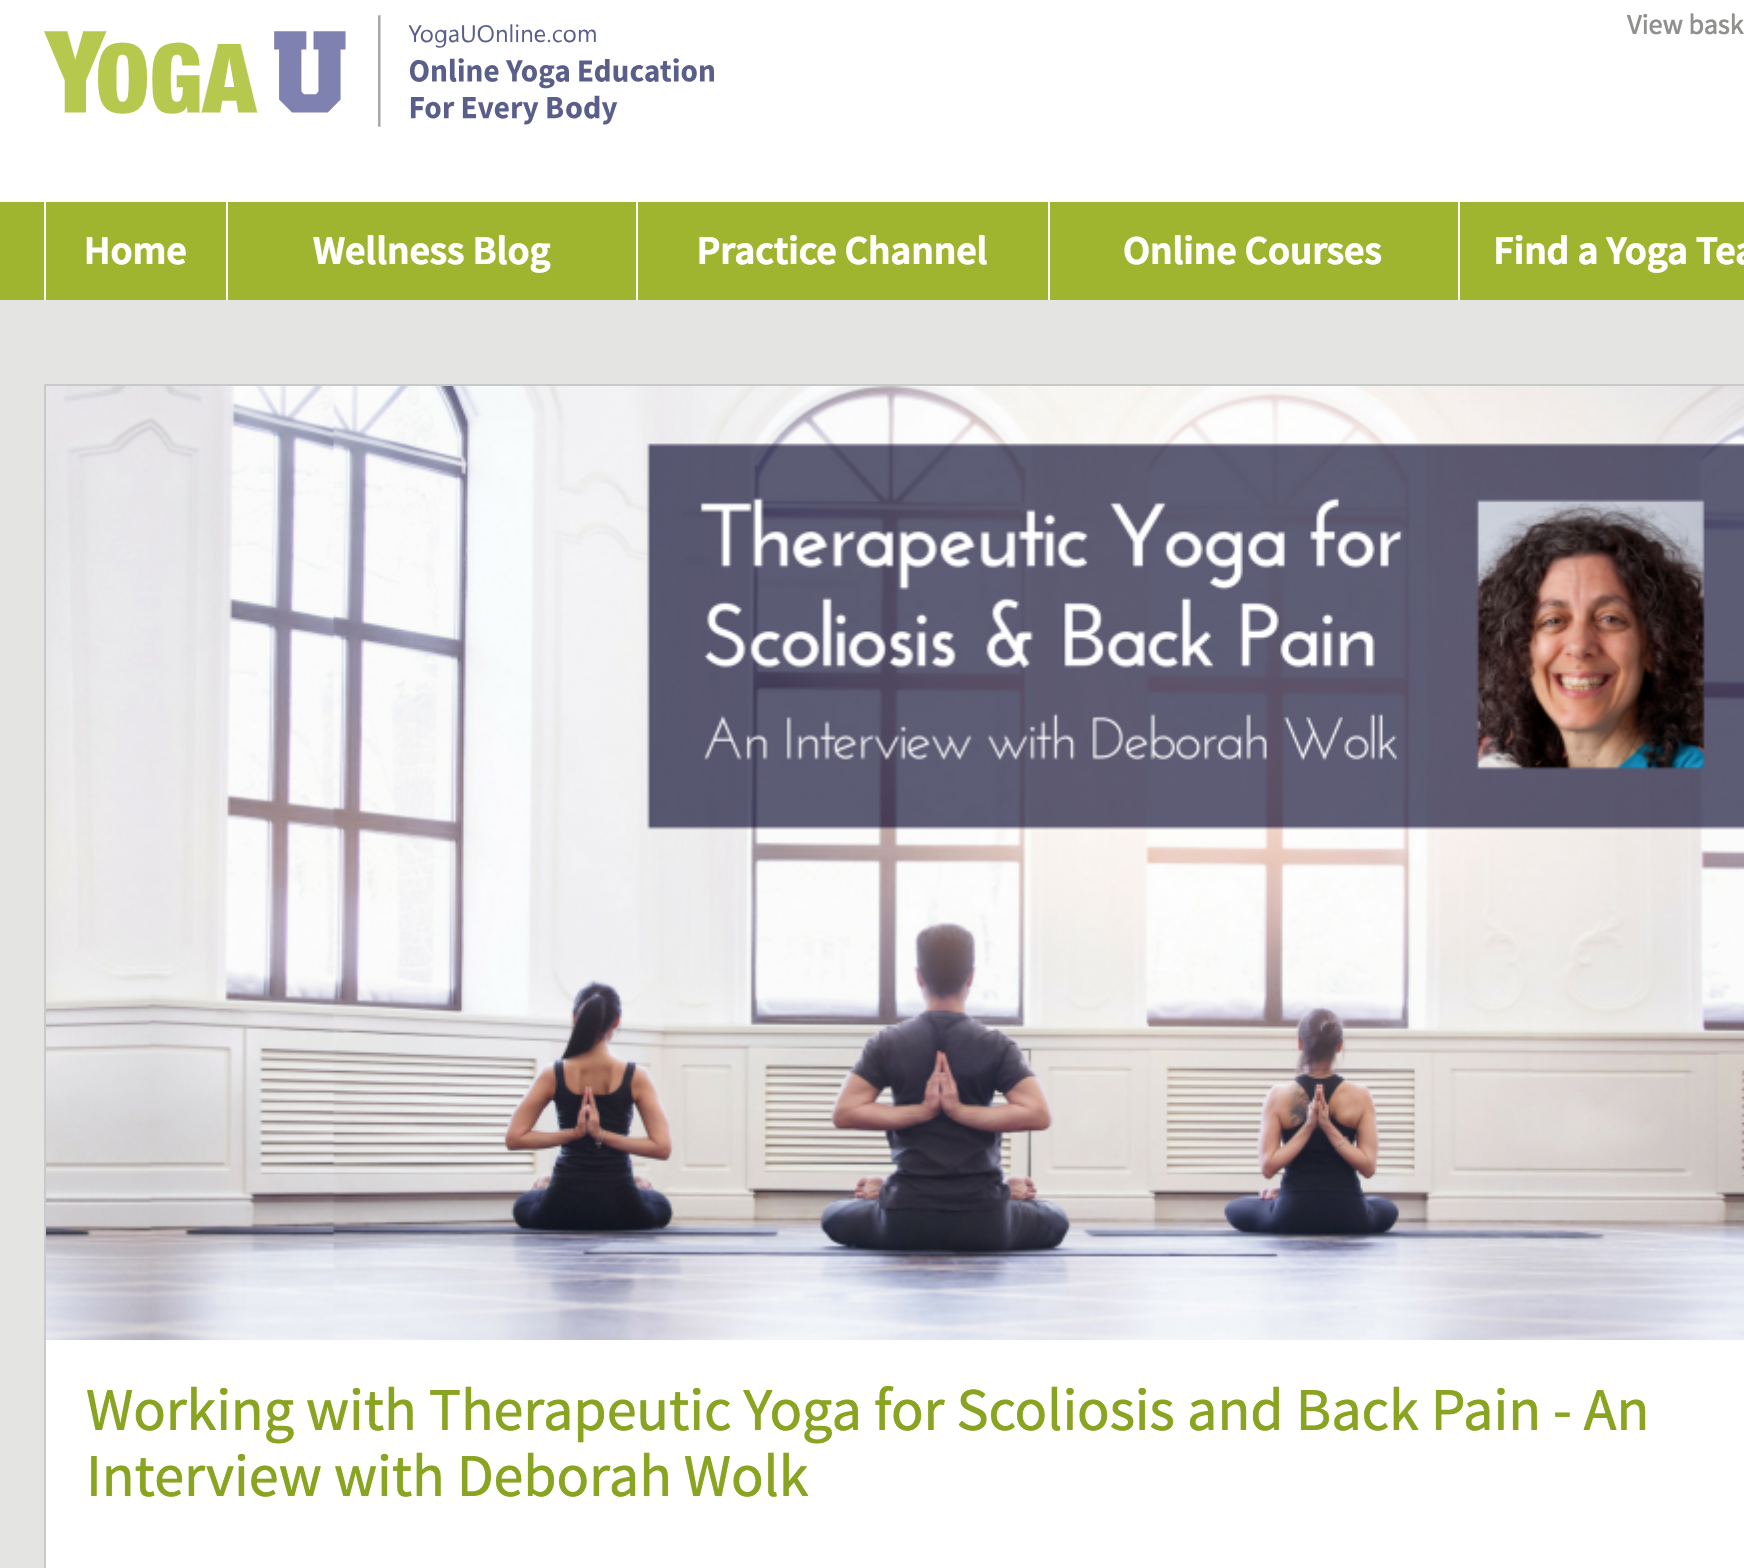 Yoga U Online, Working with Therapeutic Yoga for Scoliosis